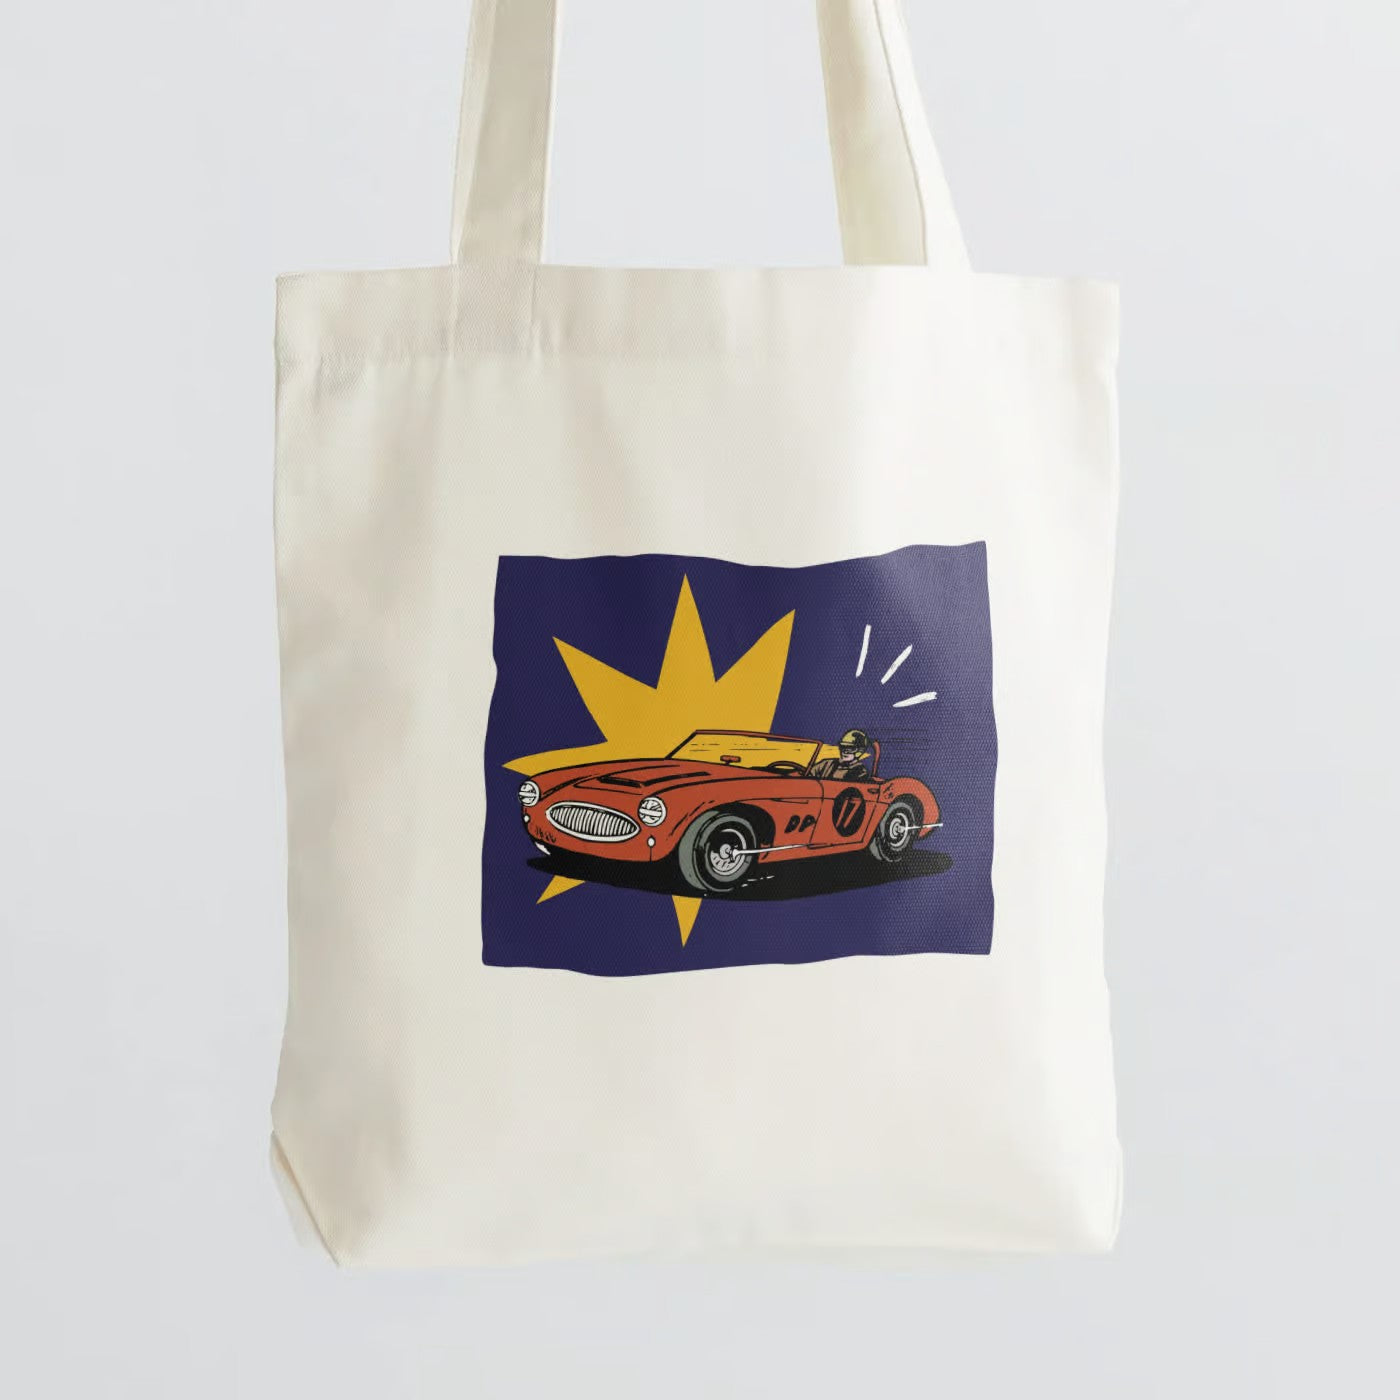 Evoke the spirit of classic automotive style with our "Retro Roadster" Cotton Canvas Tote Bag. This tote features a vintage racing car, top-down, capturing the essence of open-road adventure and timeless design. Crafted for durability and style, it includes a secure zipper closure for daily convenience. Whether you're an auto enthusiast or a lover of classic aesthetics, our Cotton Canvas Tote Bag is the perfect accessory to showcase your passion. Order yours today and ride in style!